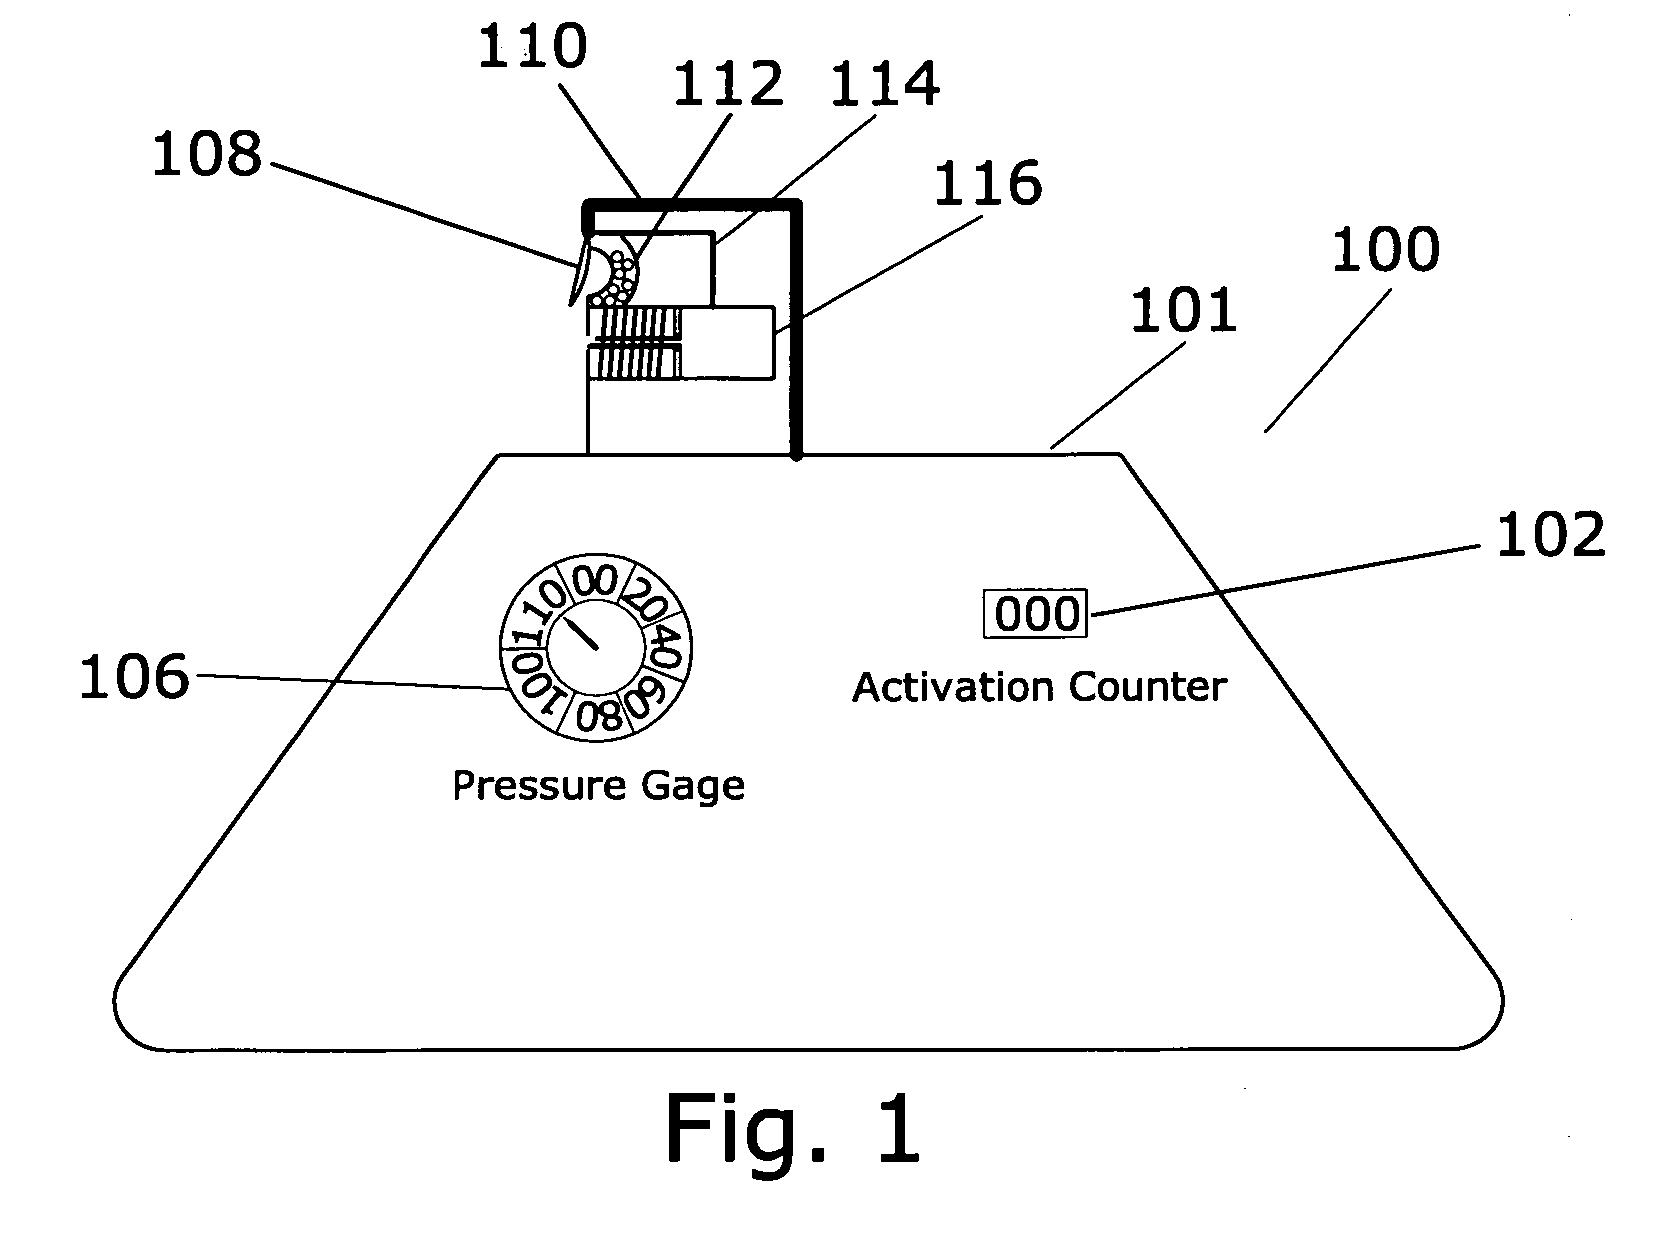 Pneumatic activated device for rodent control